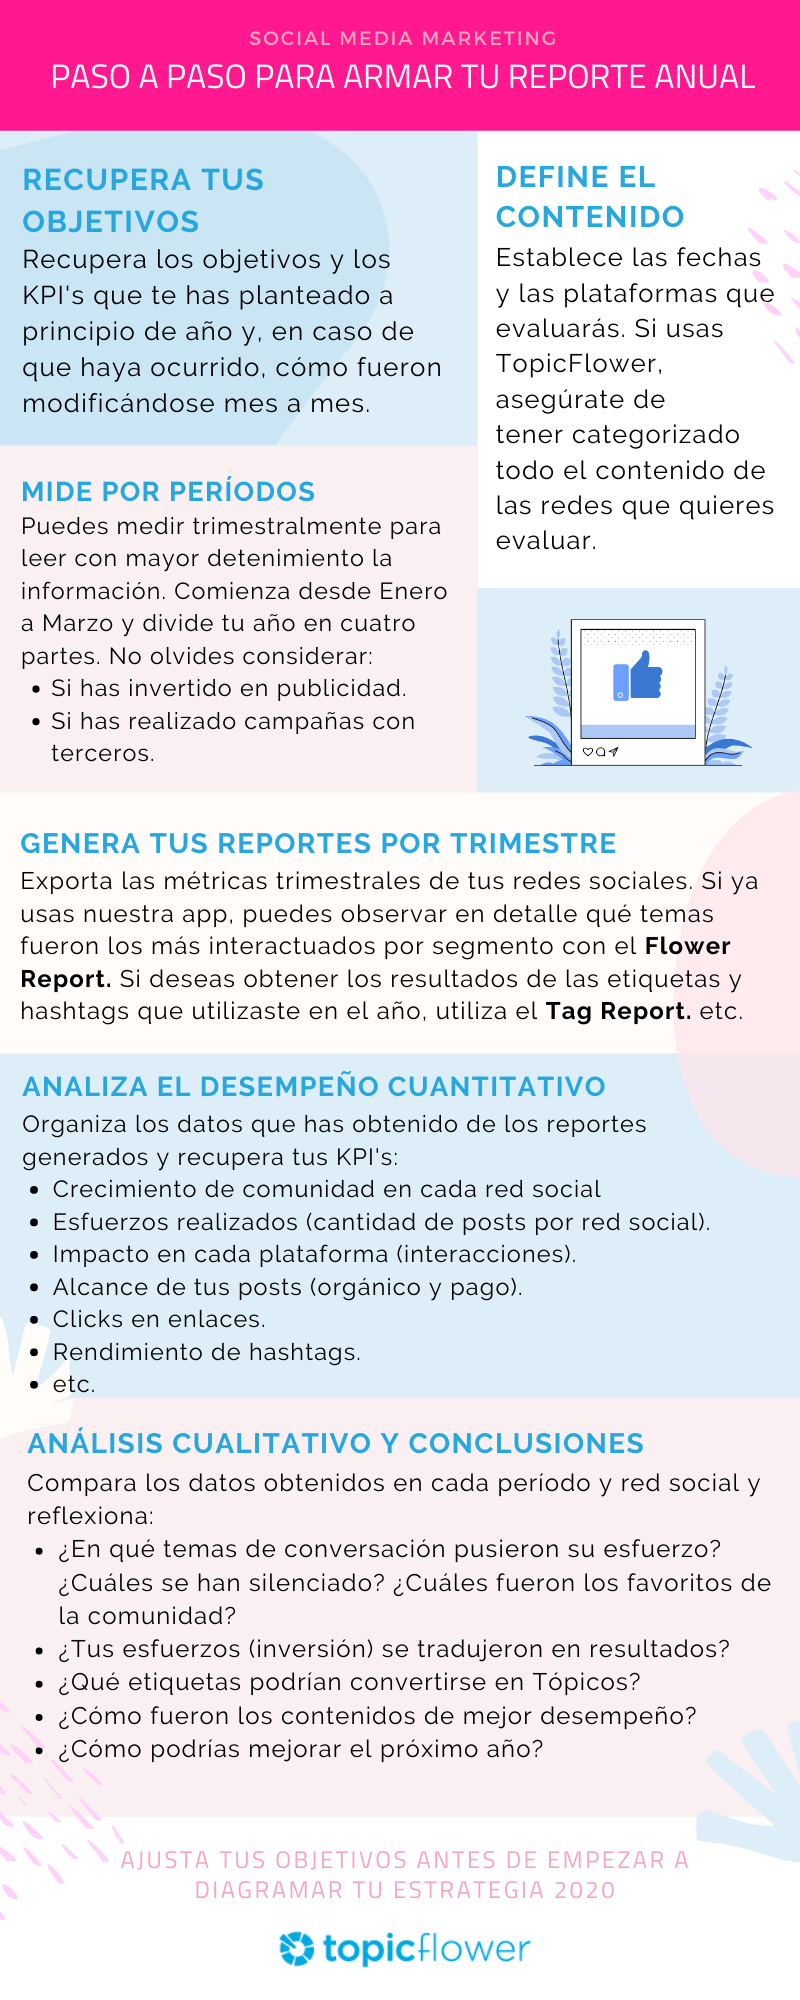 topicflower-analisis-reporte-anual